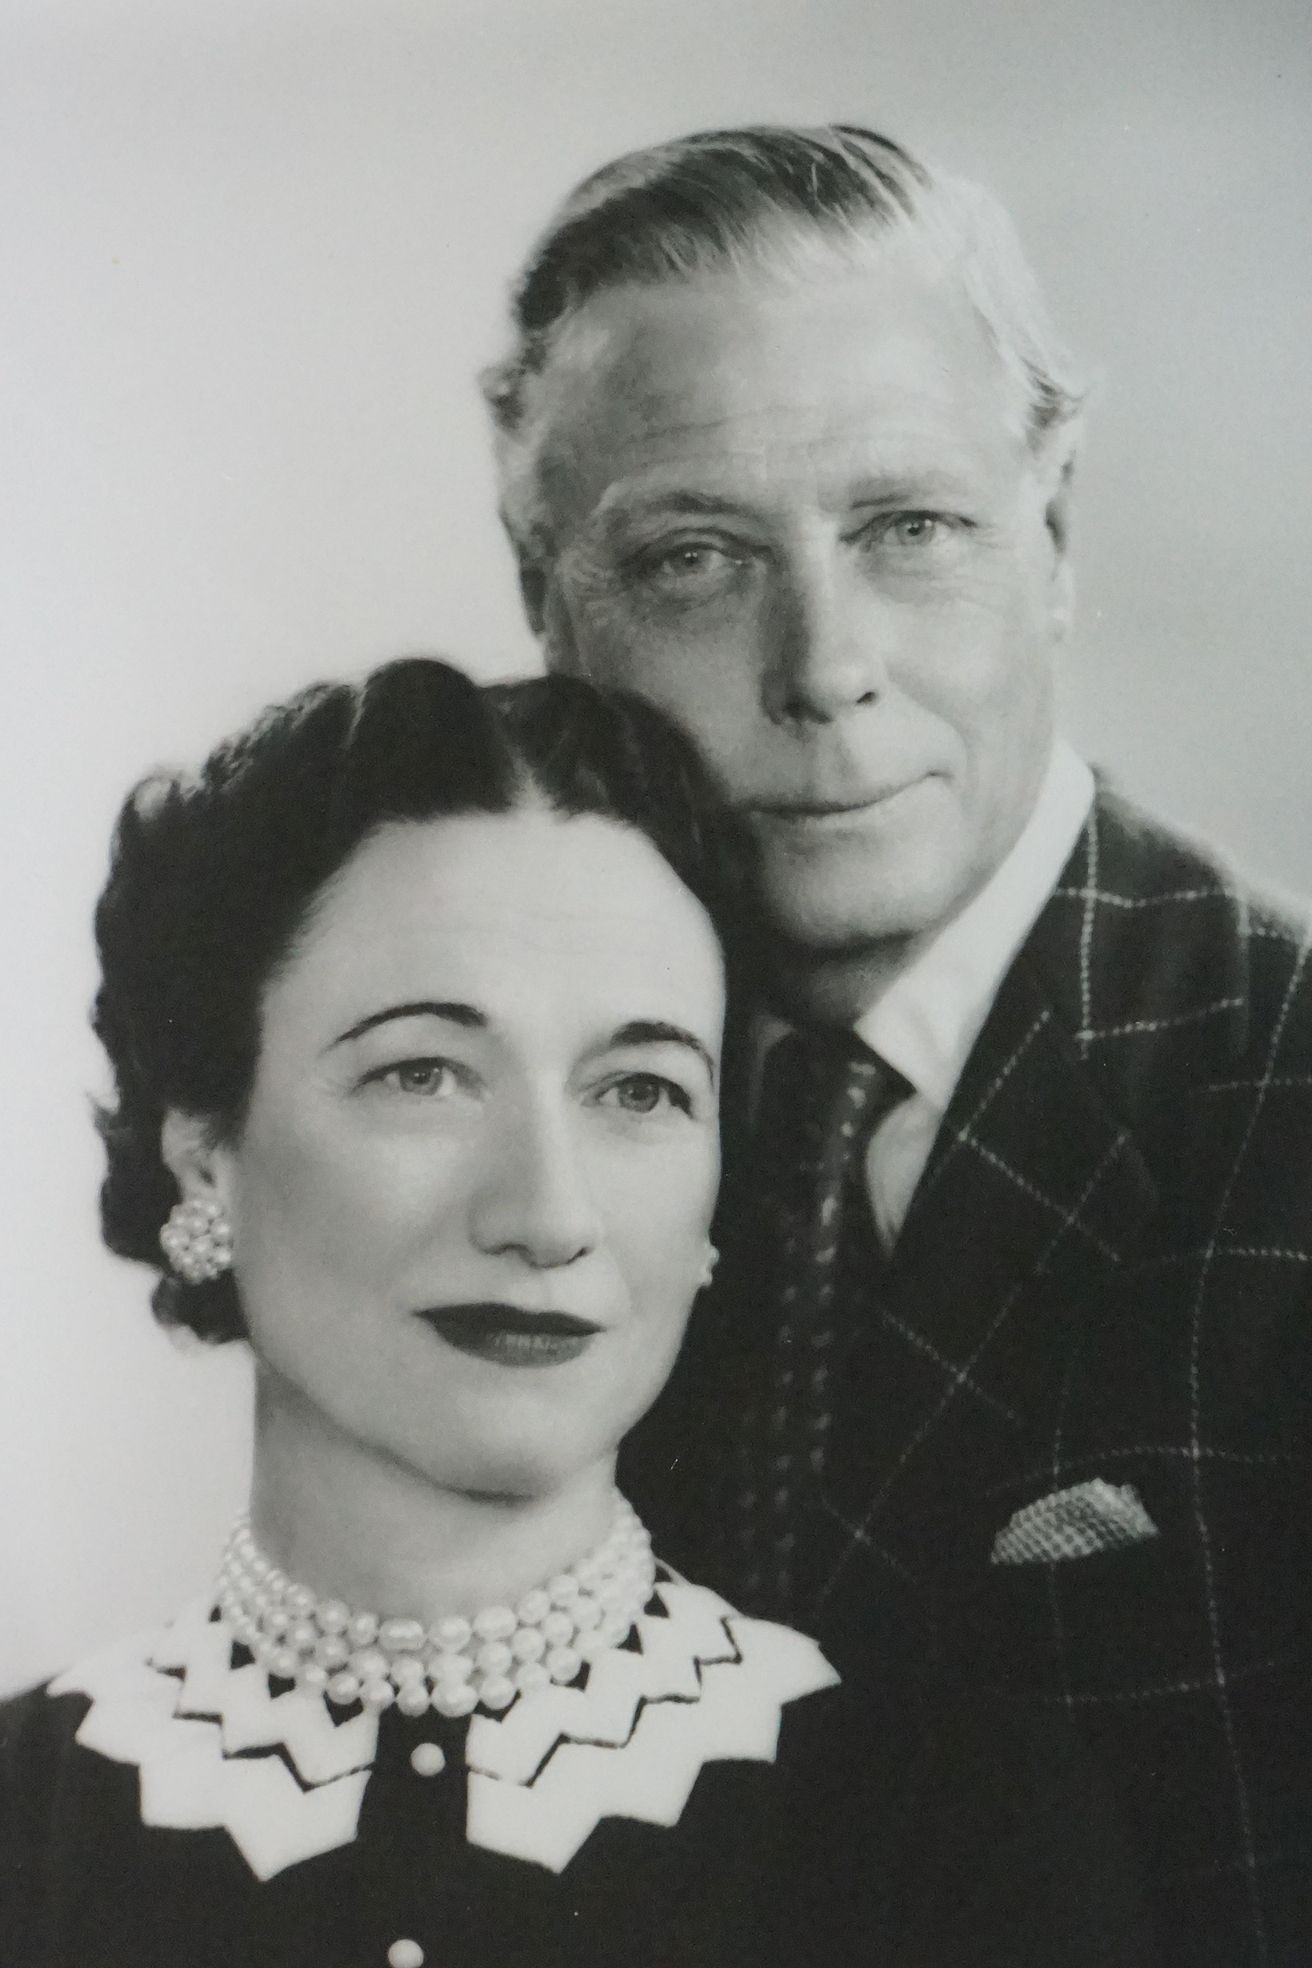 A Edward Duke of Windsor and Wallis Simpson autograph together with Black & White photograph. - Image 3 of 9